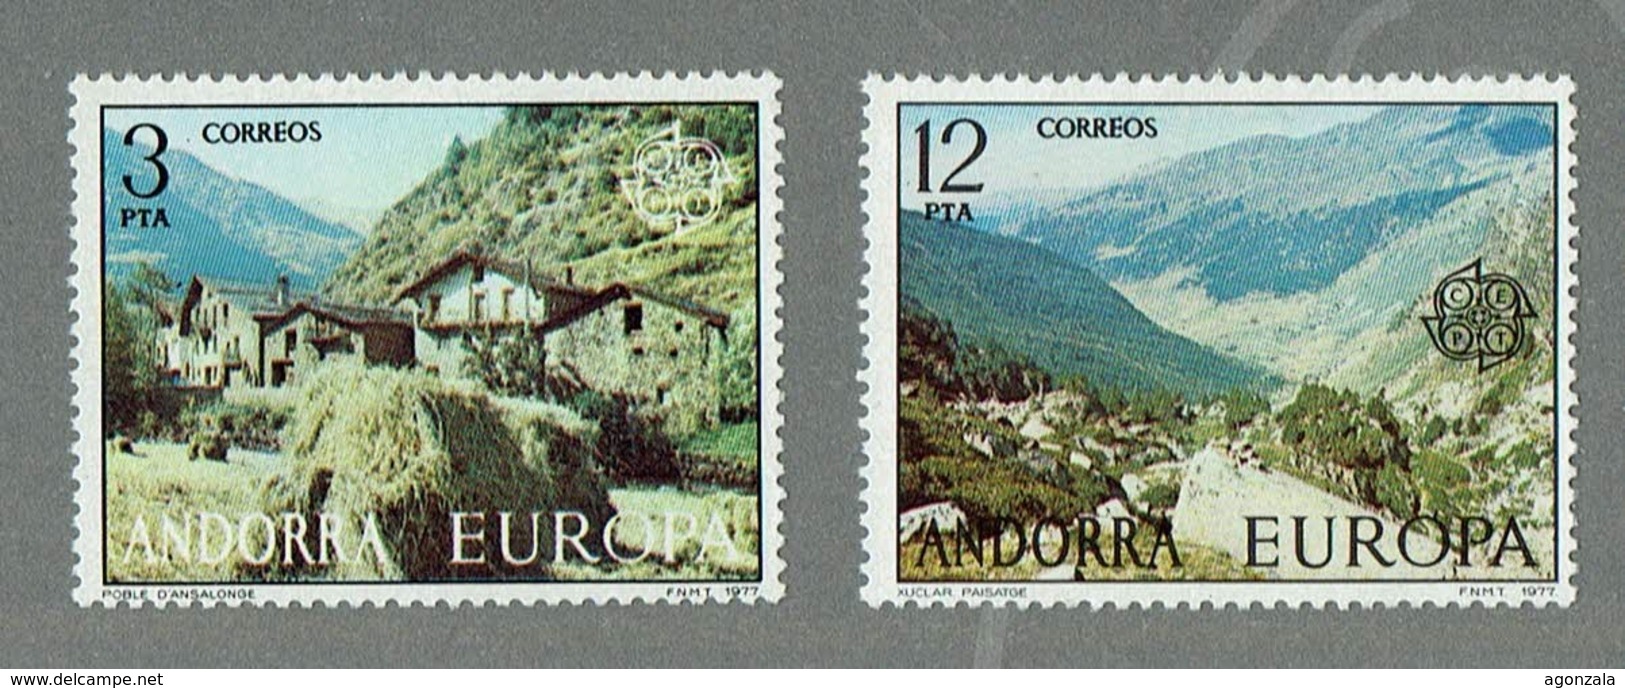 ANDORRA EUROPE CEPT 1977 NATURE MNH STAMPS - 1977